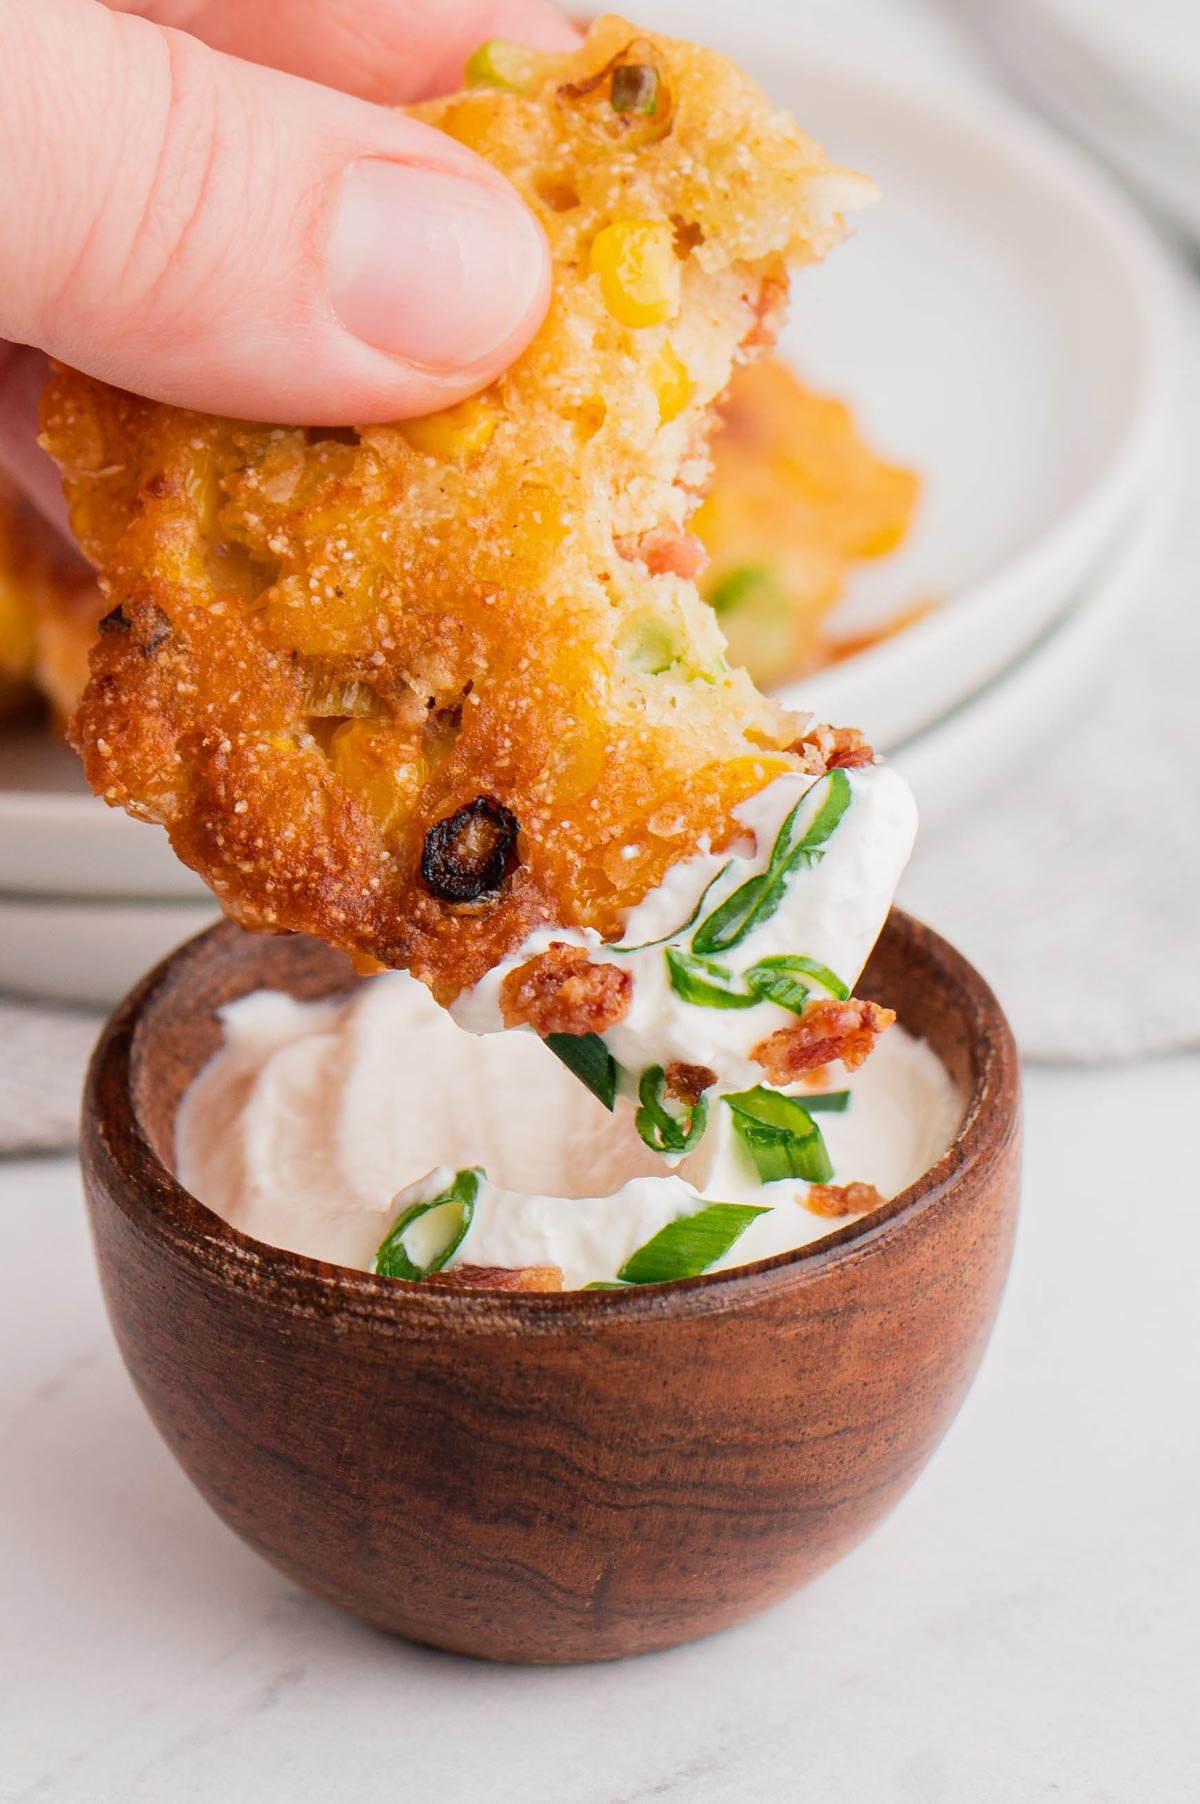 A hand dipping a corn fritter into a sour cream dipping sauce.